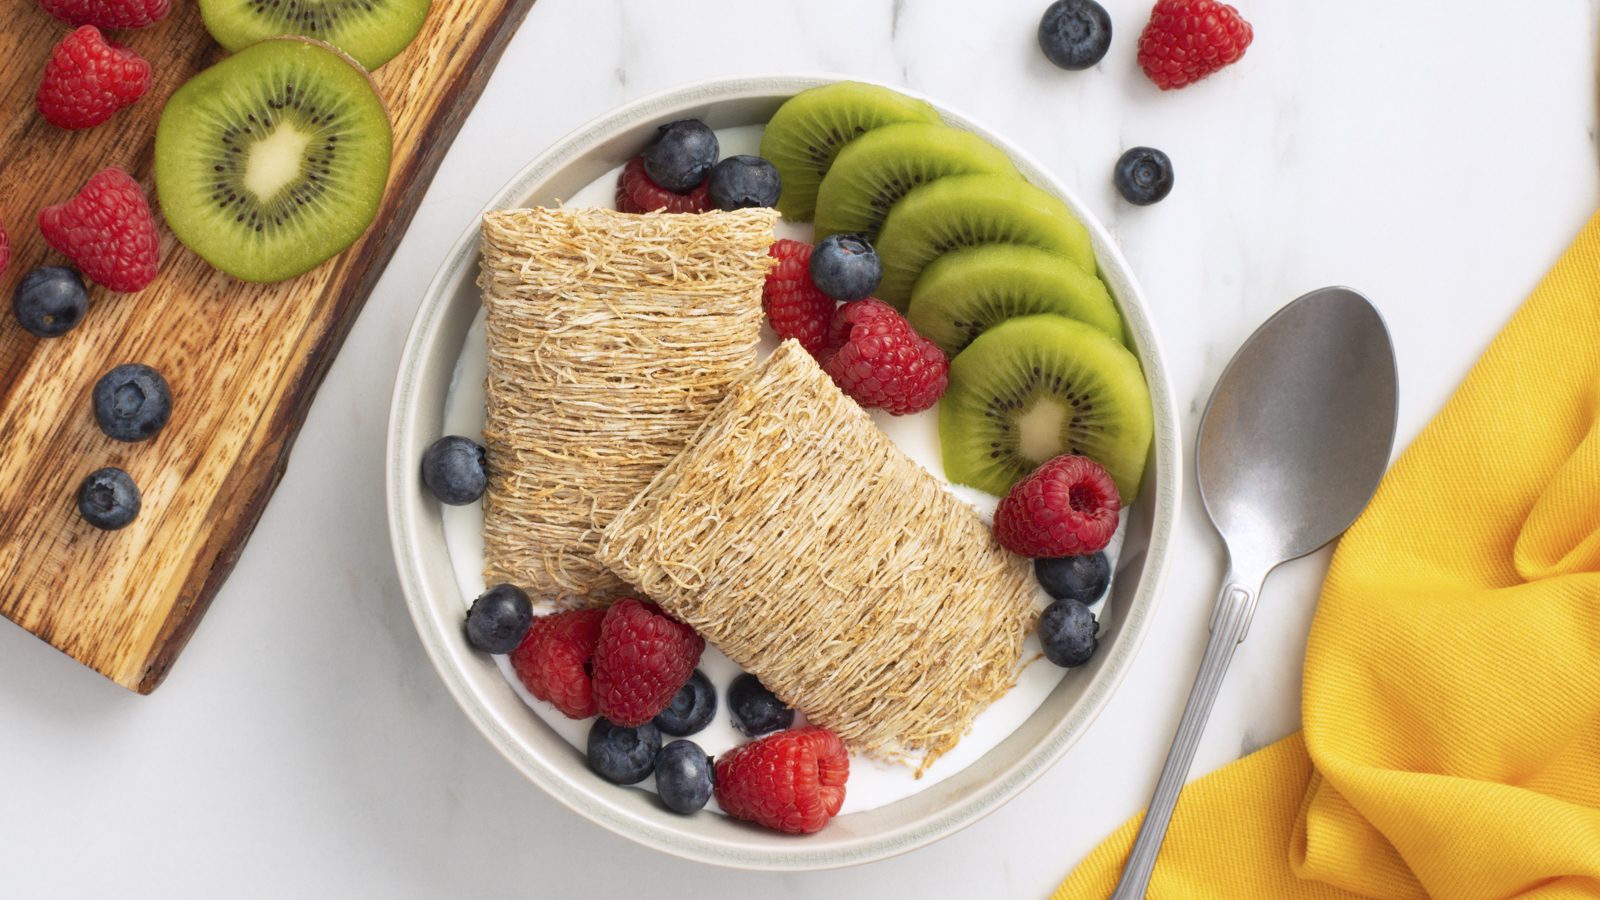 Shredded Wheat Fruitalicious in a white bowl with sliced kiwi, blueberries and raspberries.